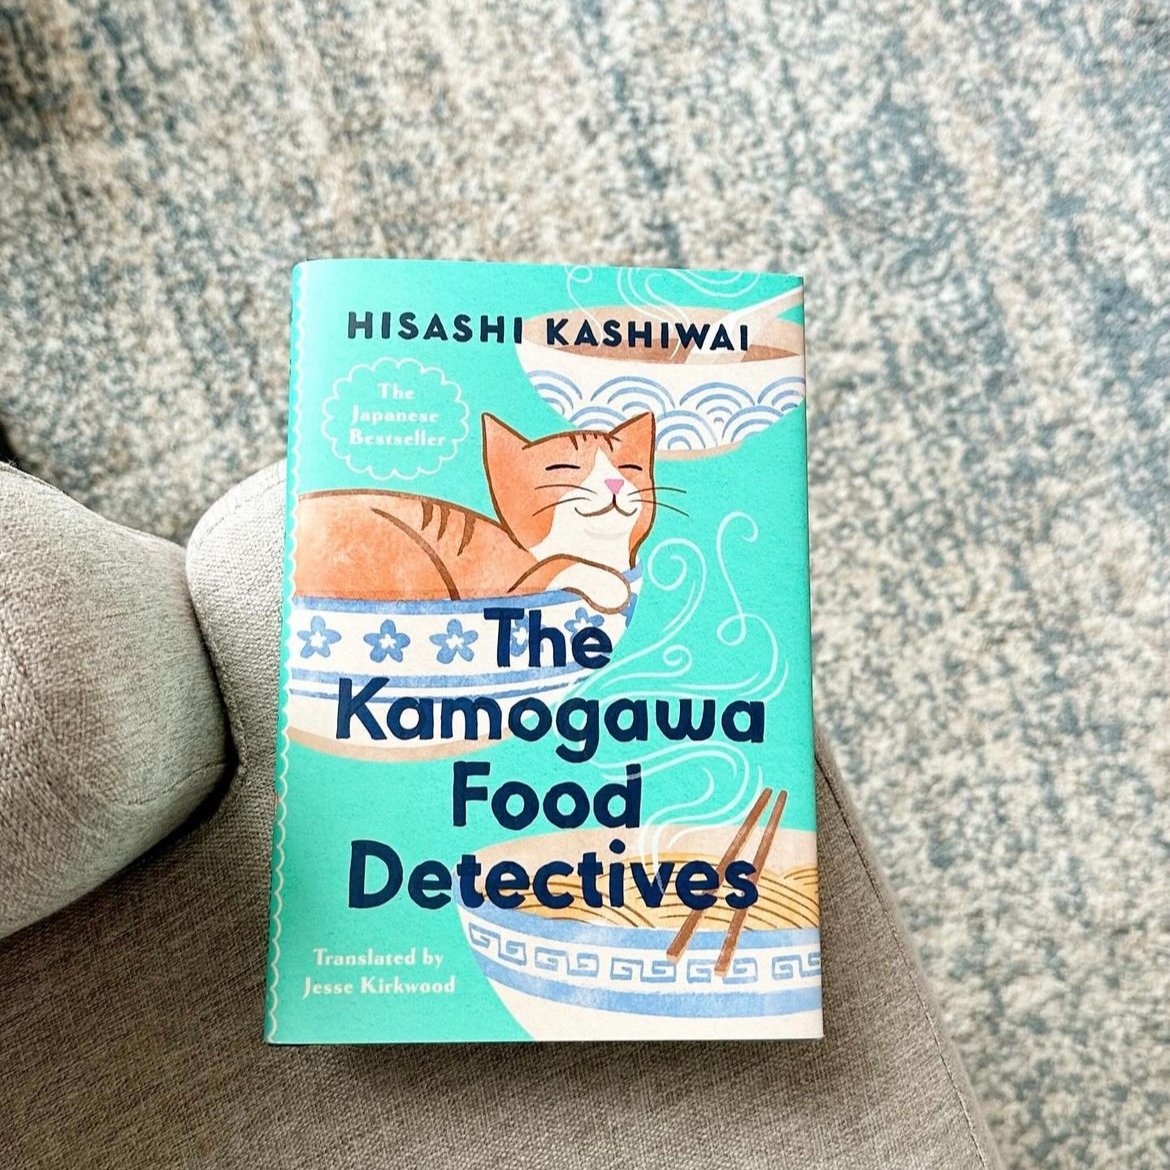 Mondays are for cozy reads that celebrate good company and good meals ✨🍜 The Kamogawa Food Detectives follows a father-daughter duo of food detectives, recreating dishes from a person’s treasured memories to open forgotten pasts and future happiness 💙 bit.ly/3Ug8Goo